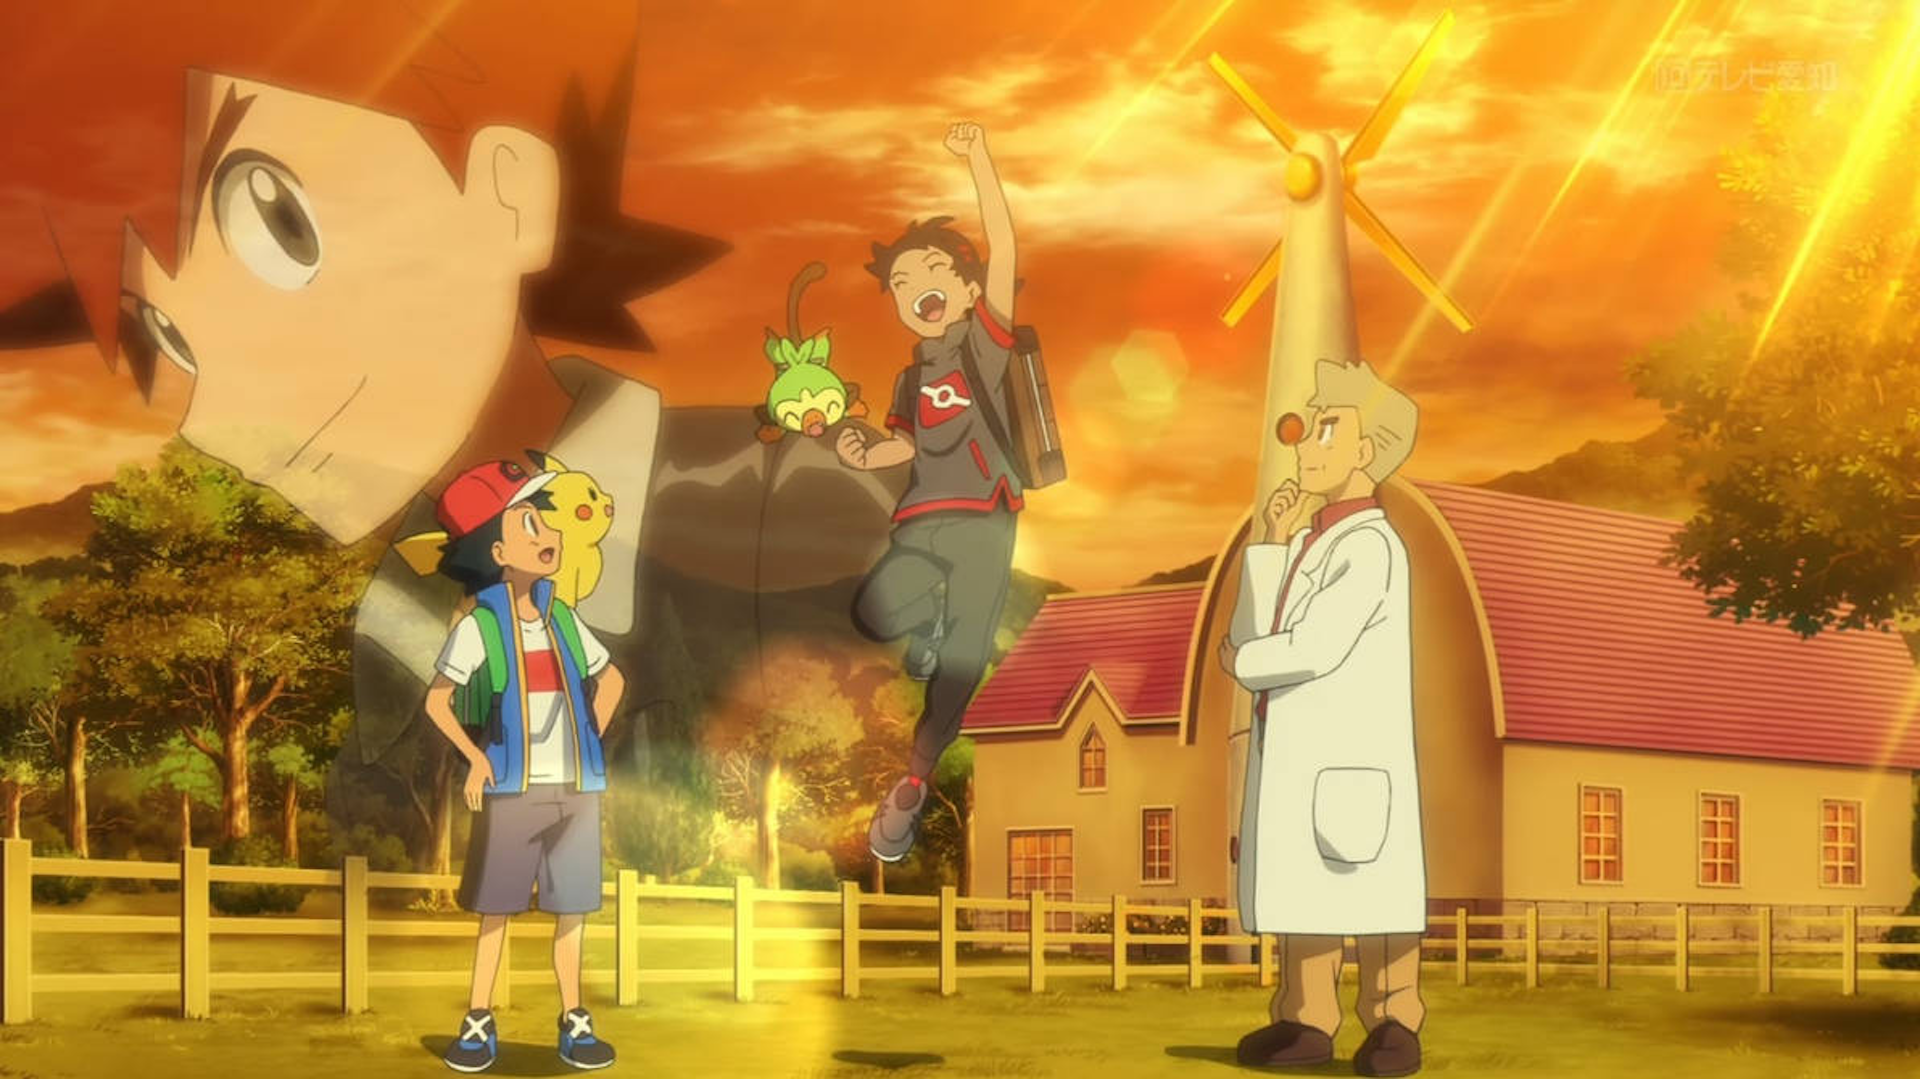 IGN on X: Ash Ketchum's greatest rival Gary Oak is returning to the anime  Pokémon Journeys, as revealed at the end of the show's new opening  sequence.  / X